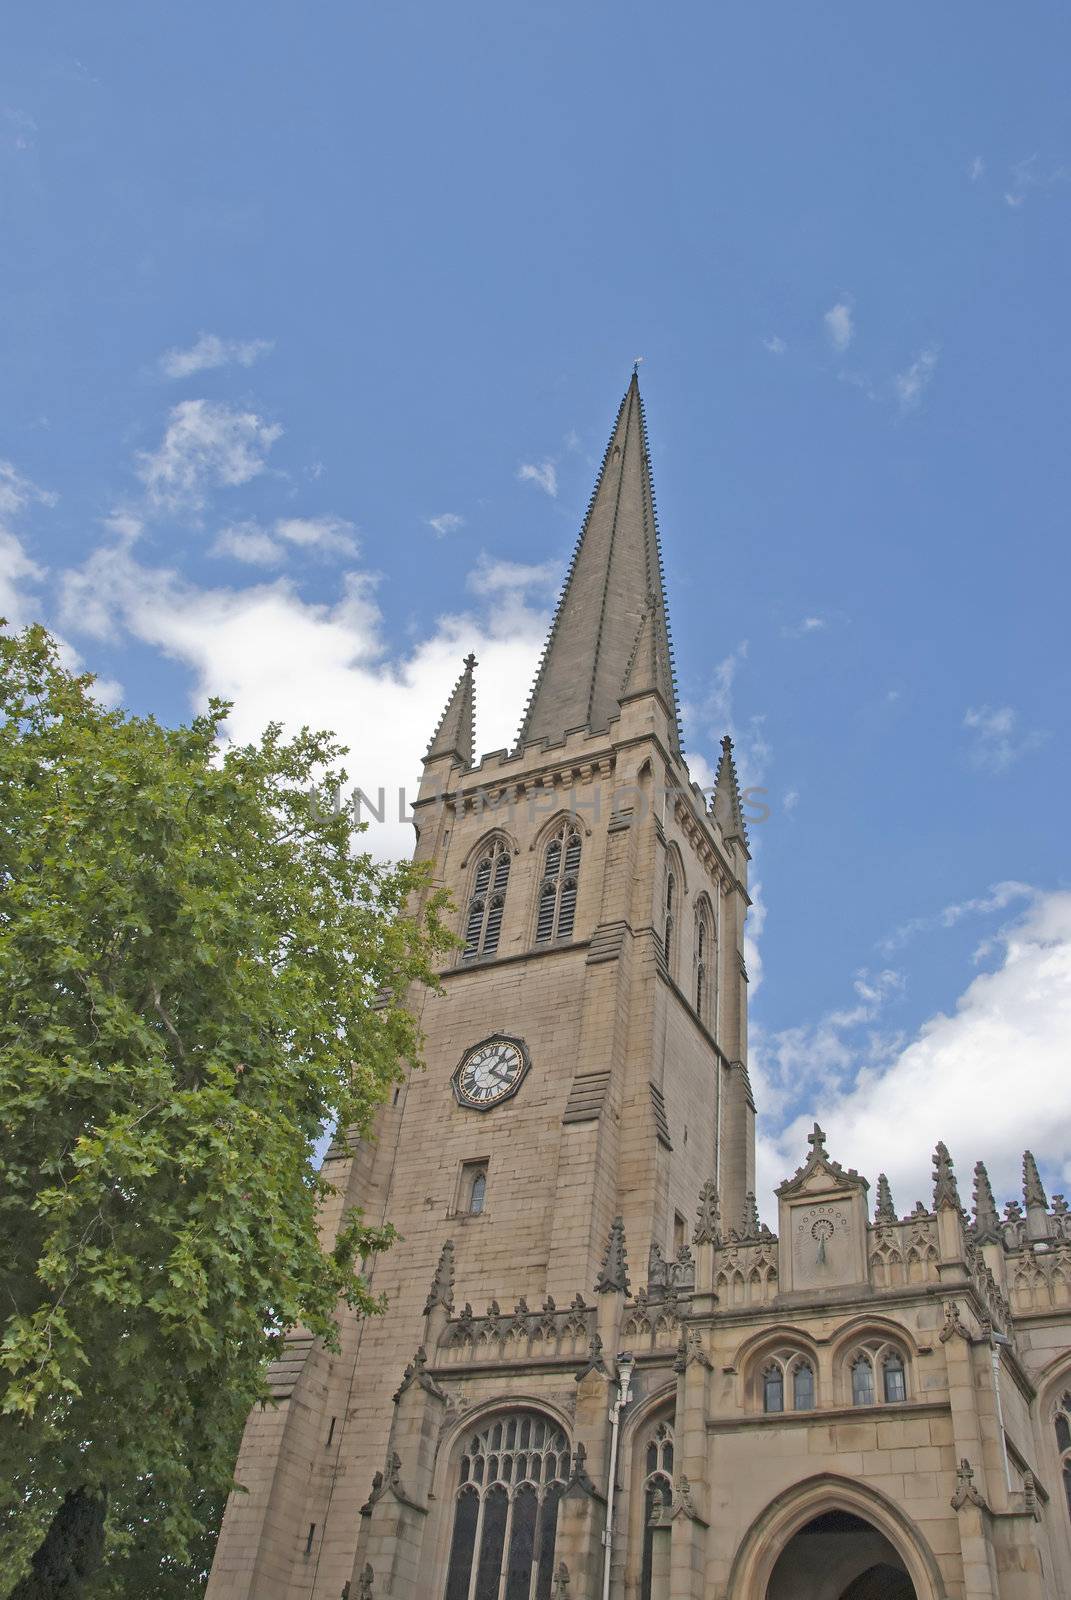 Spire of Wakefield Cathedral by d40xboy